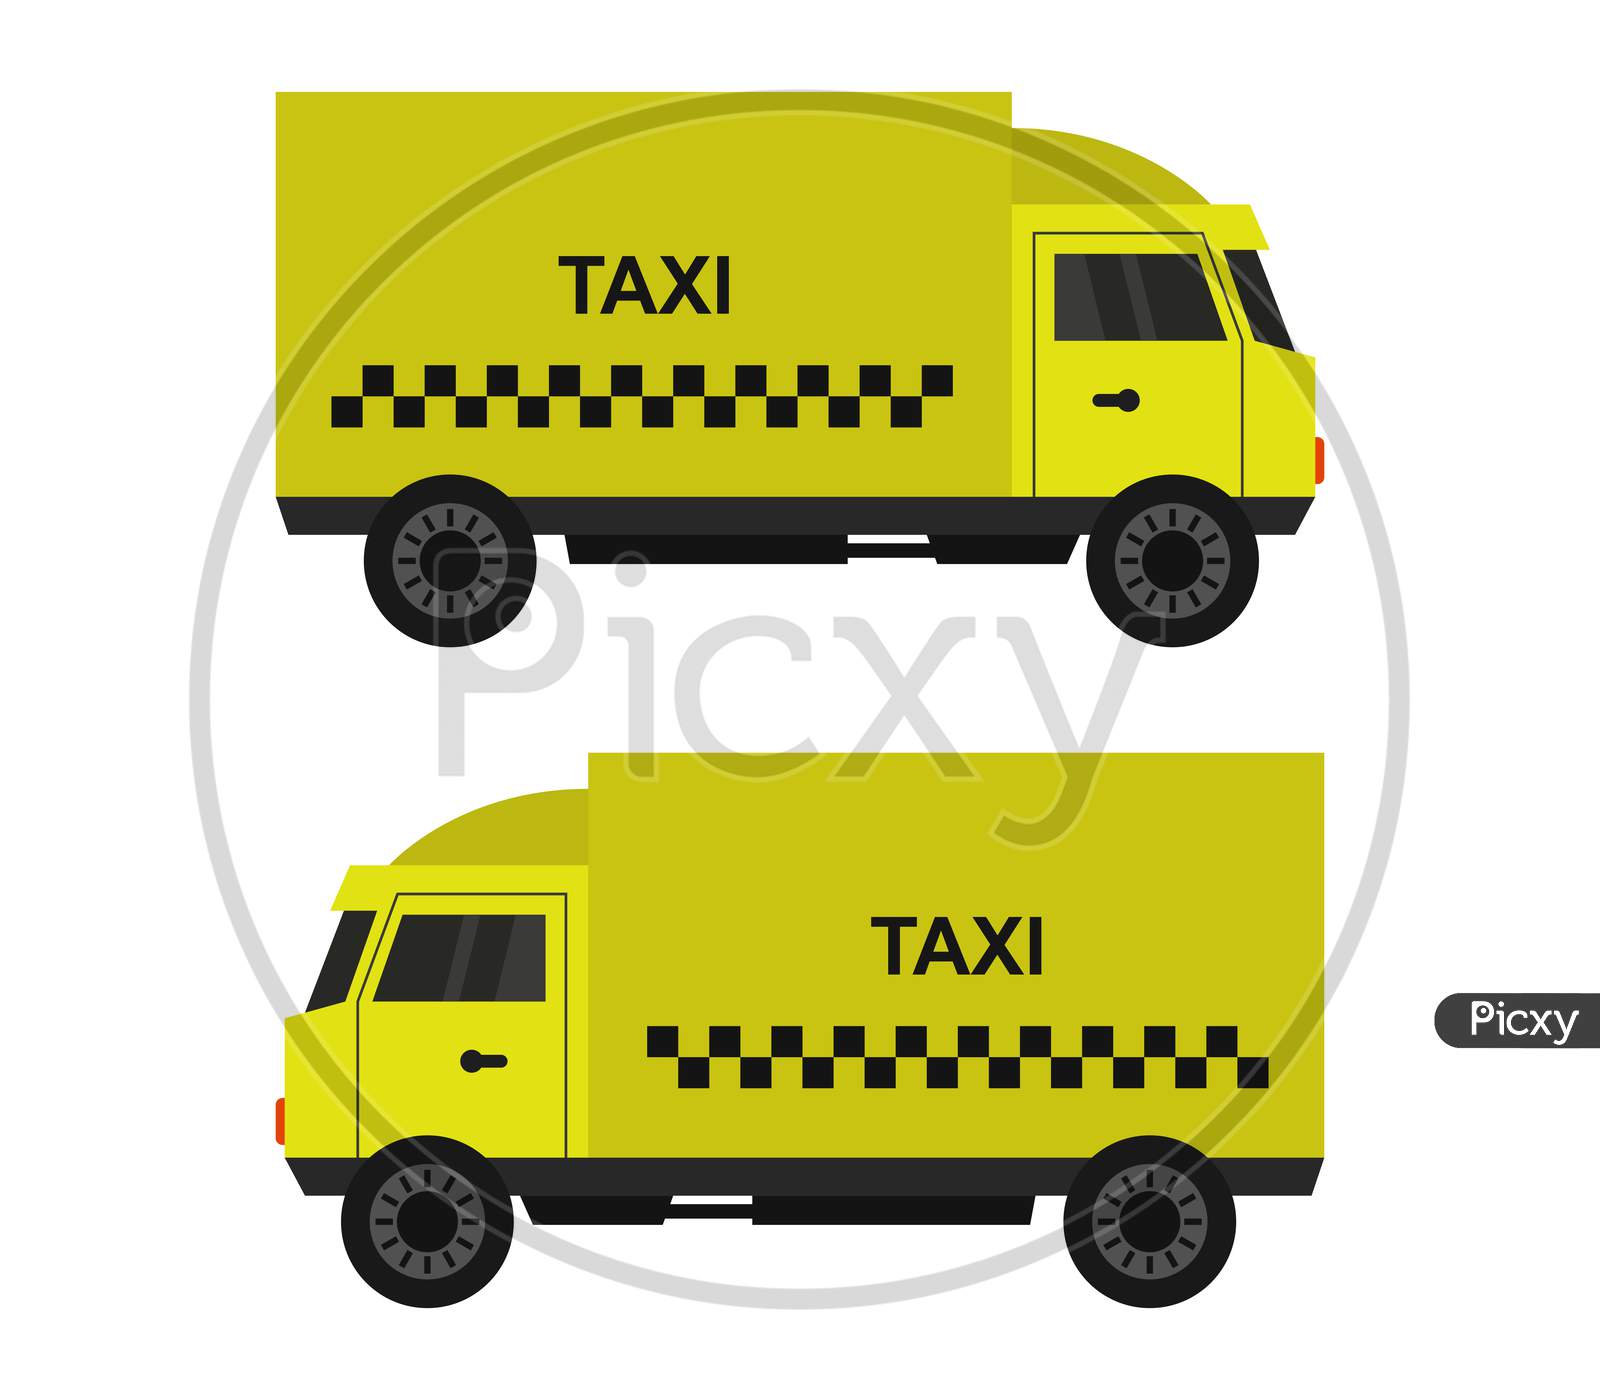 Taxi Truck Icon Illustrated In Vector On White Background